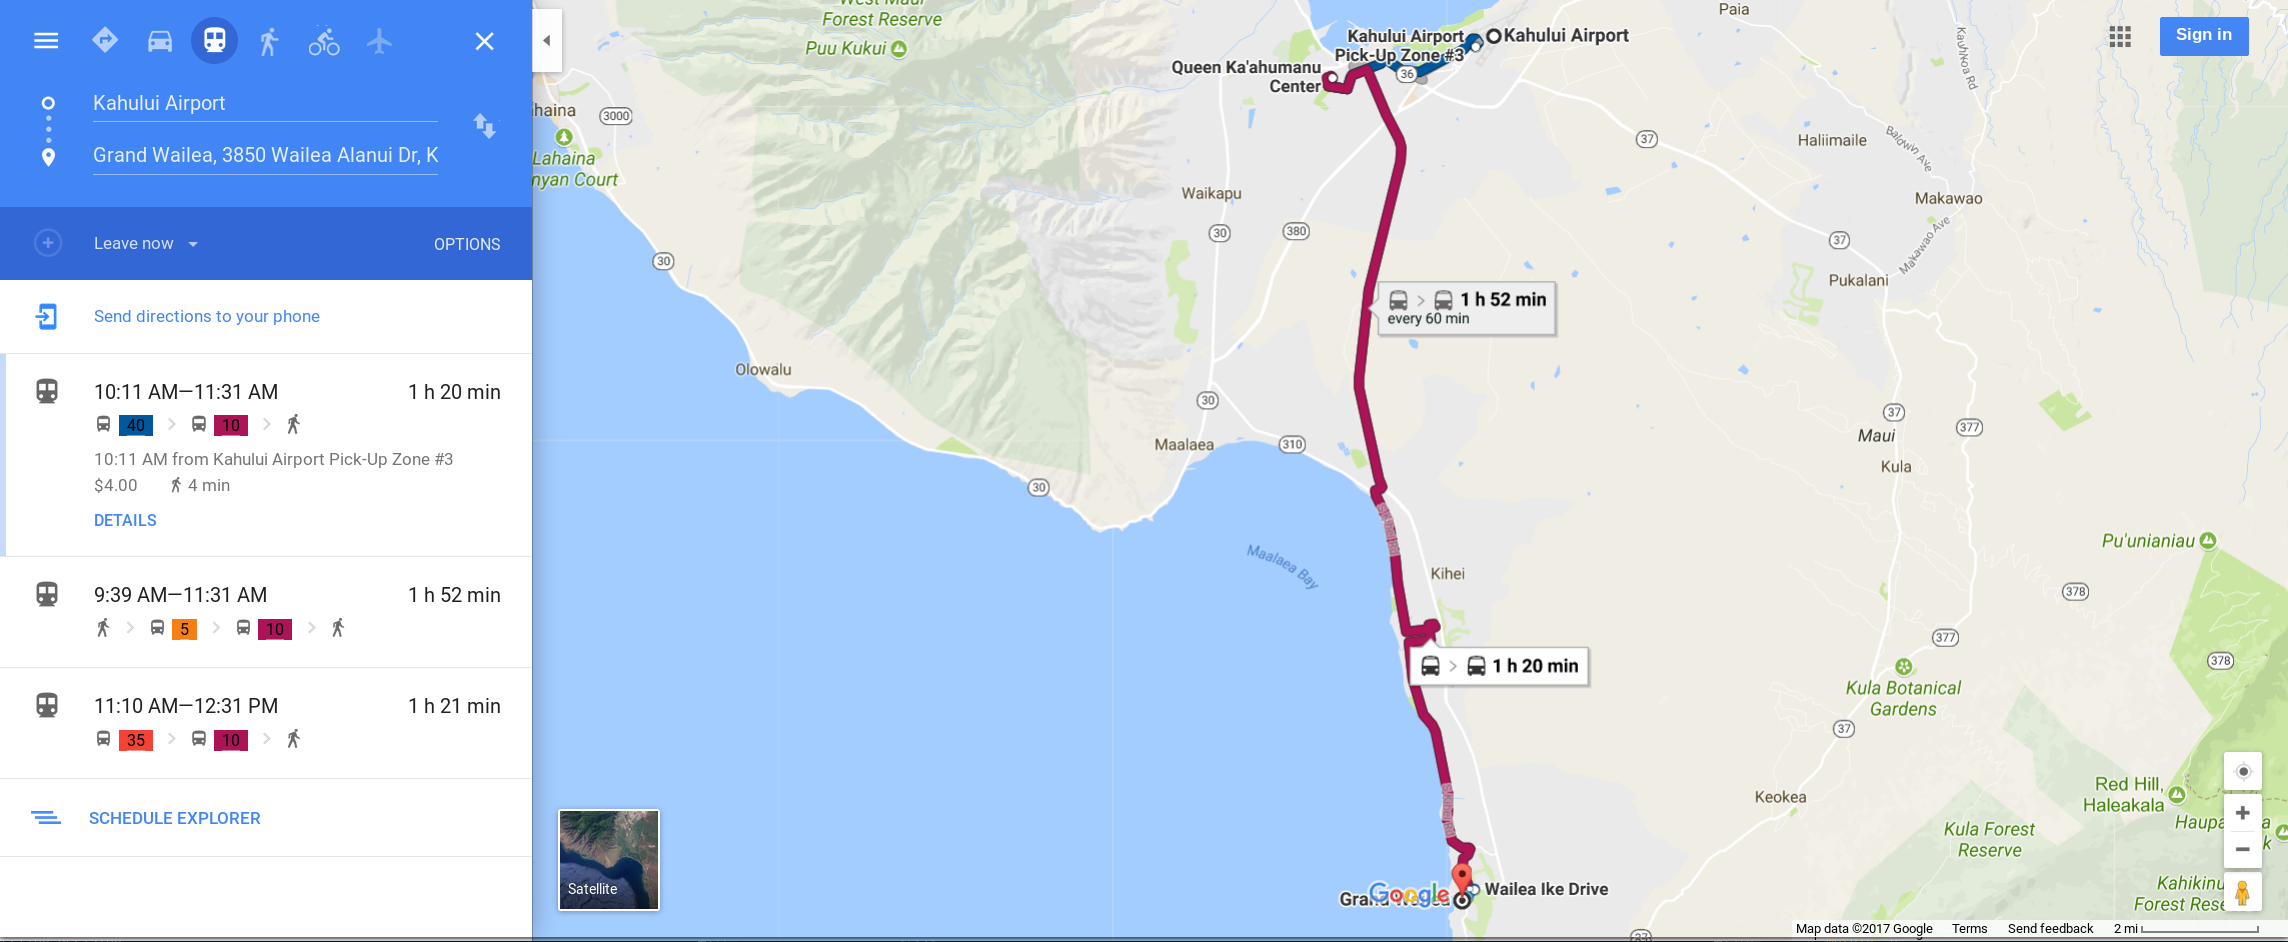 Transite map from Kahului Airport to the Grand Wailea Hotel